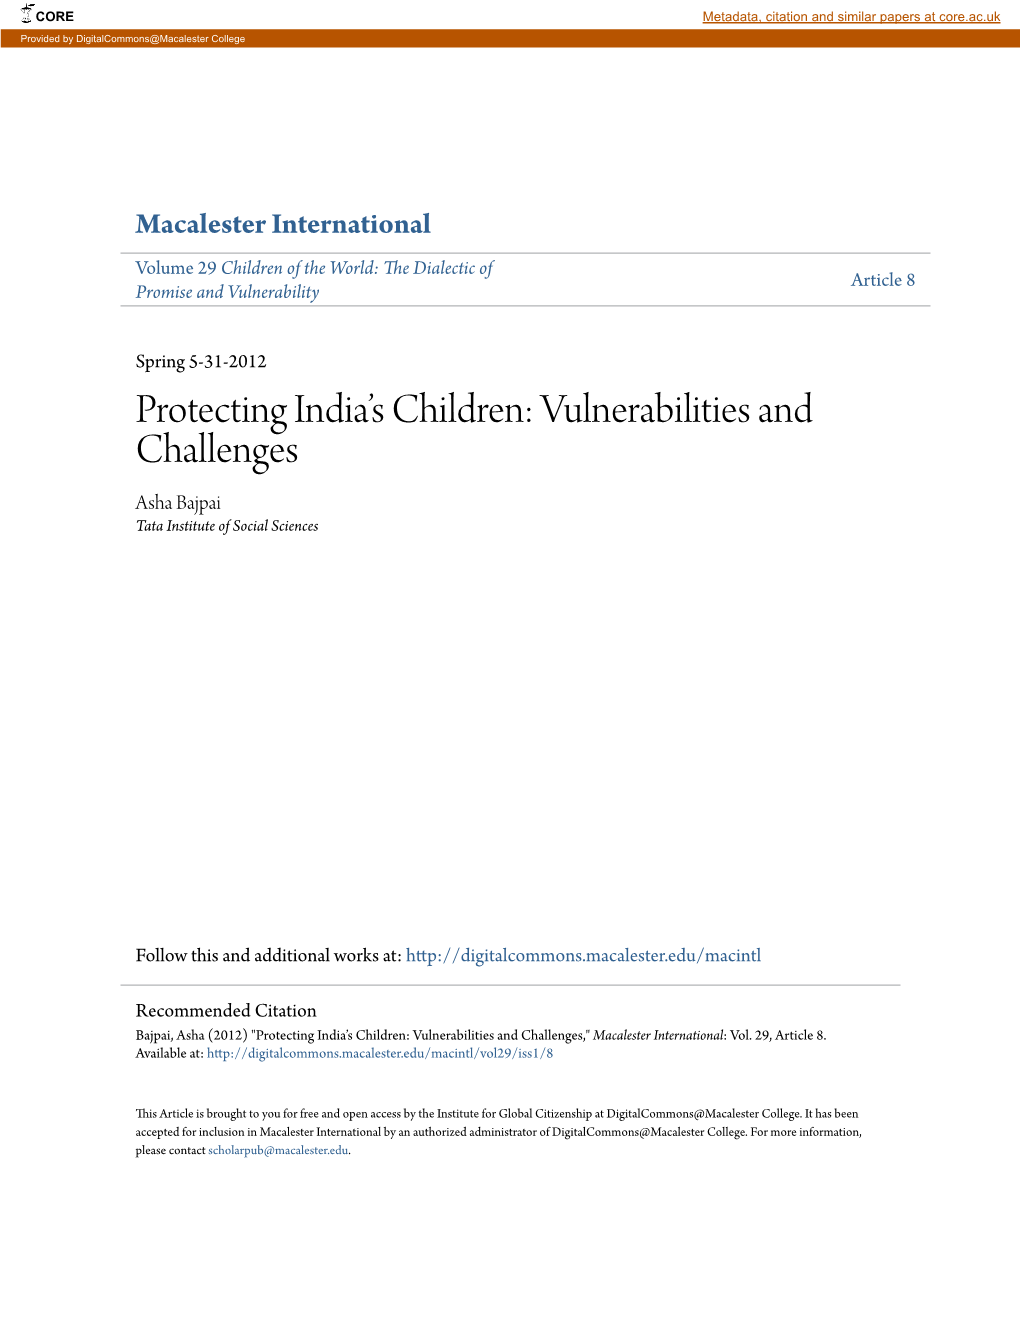 Protecting India's Children: Vulnerabilities and Challenges